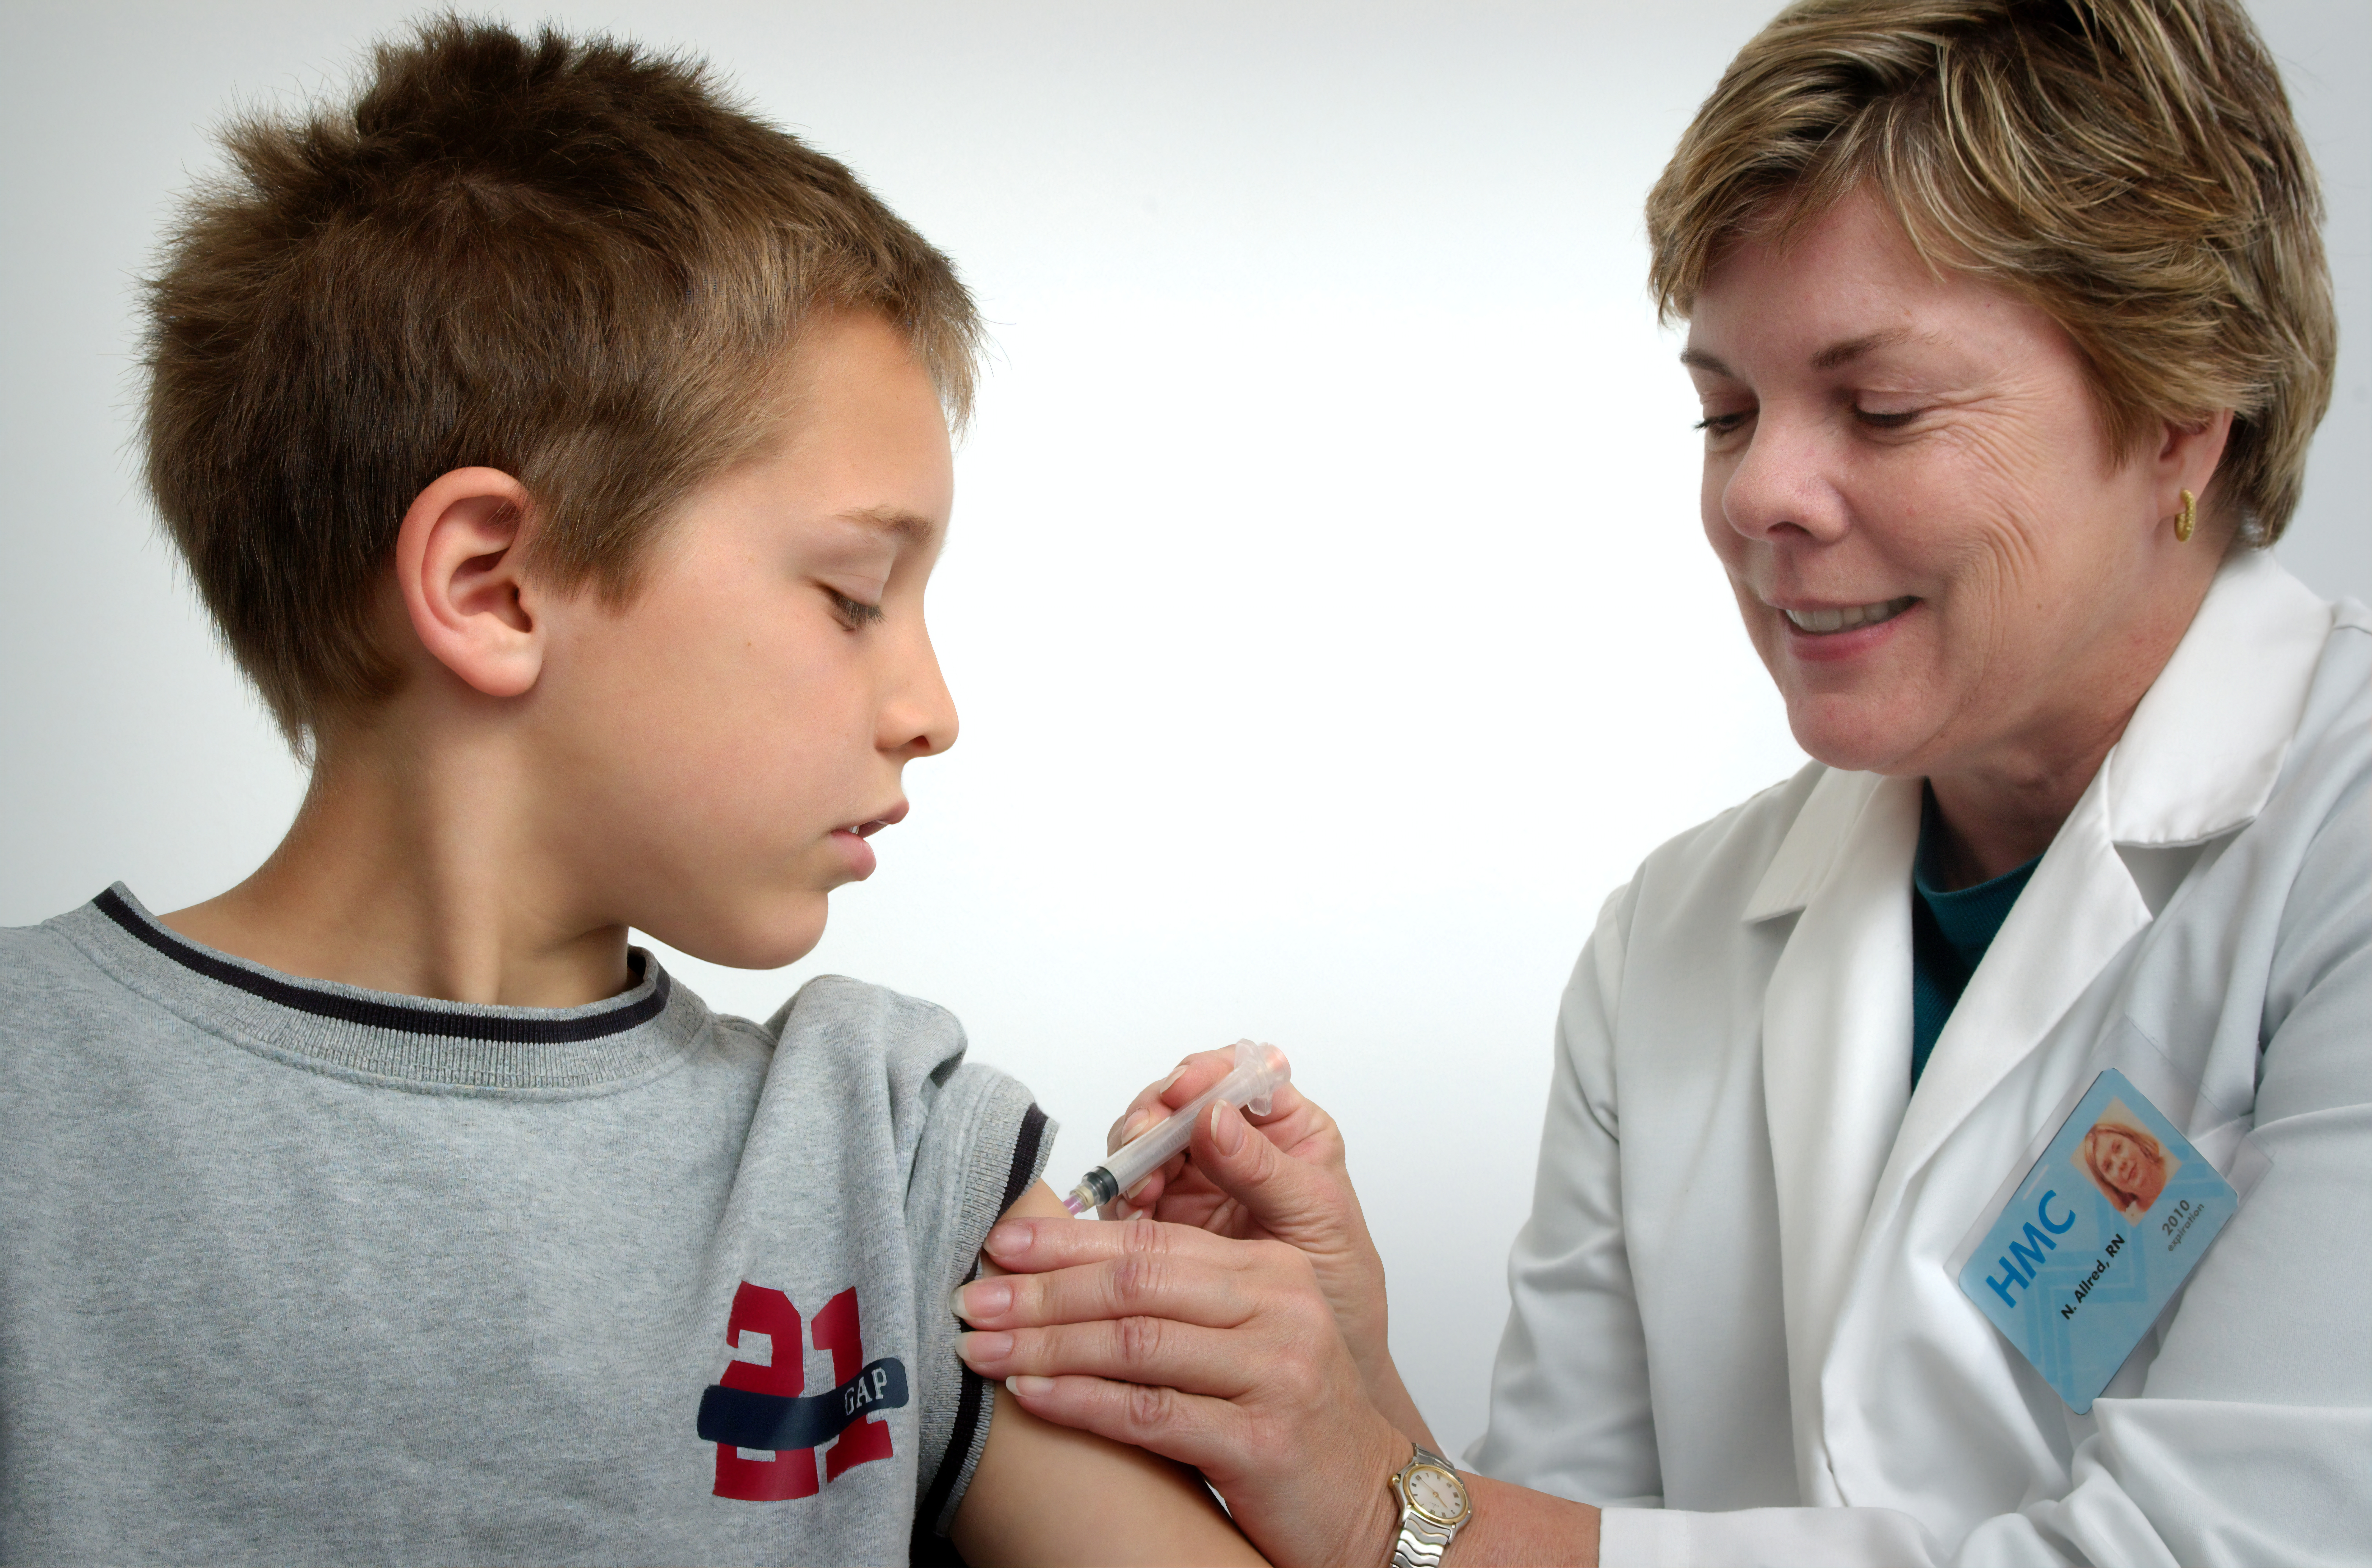 Here's What You Should Know About The COVID-19 Vaccine & Its Effect On Kids